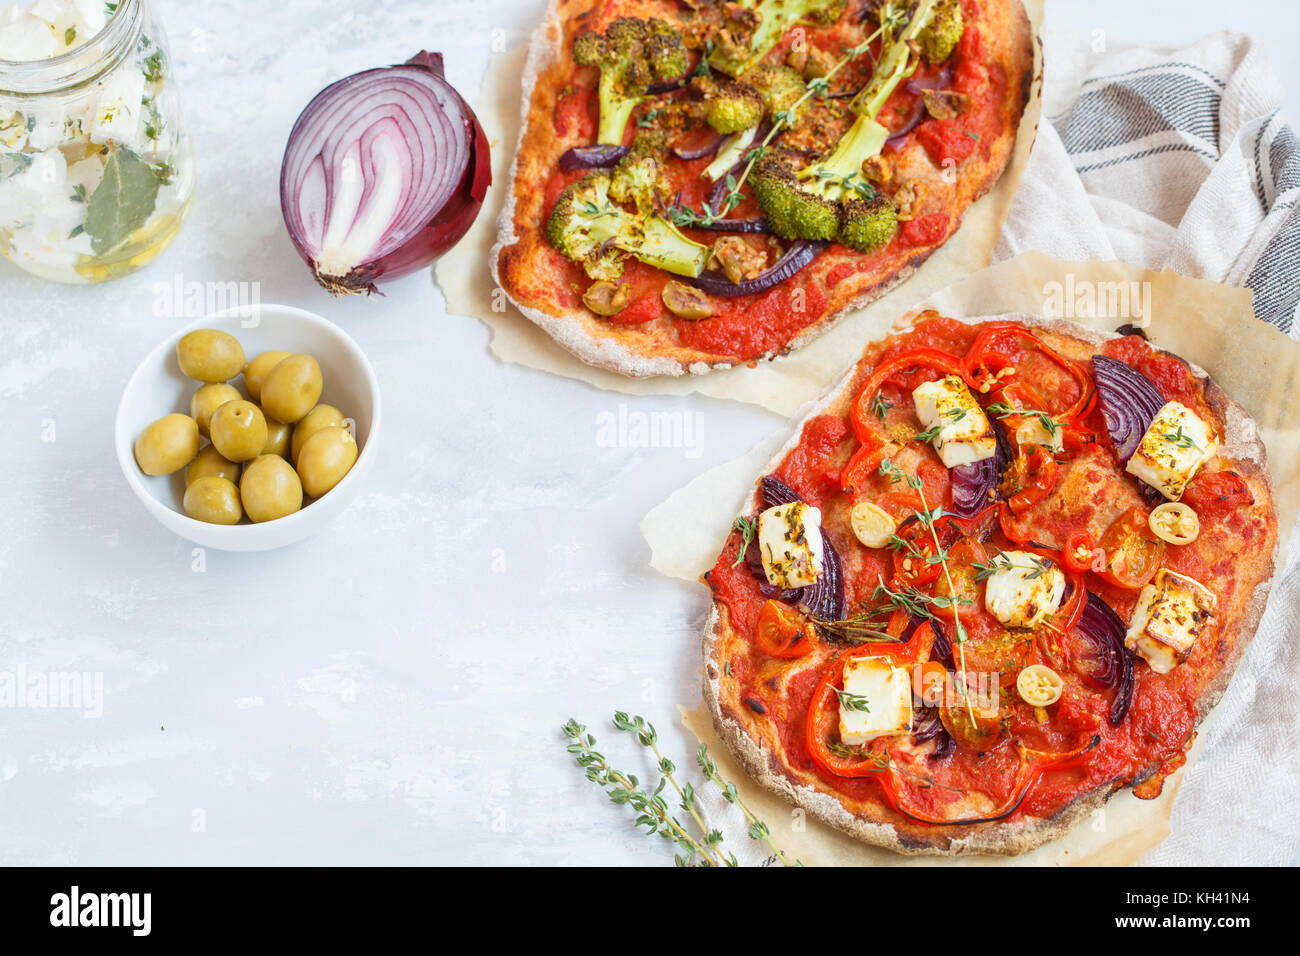 Homemade vegetarian vegetable pizza with feta cheese and broccoli. Vegan Healthy Food Concept. Stock Photo